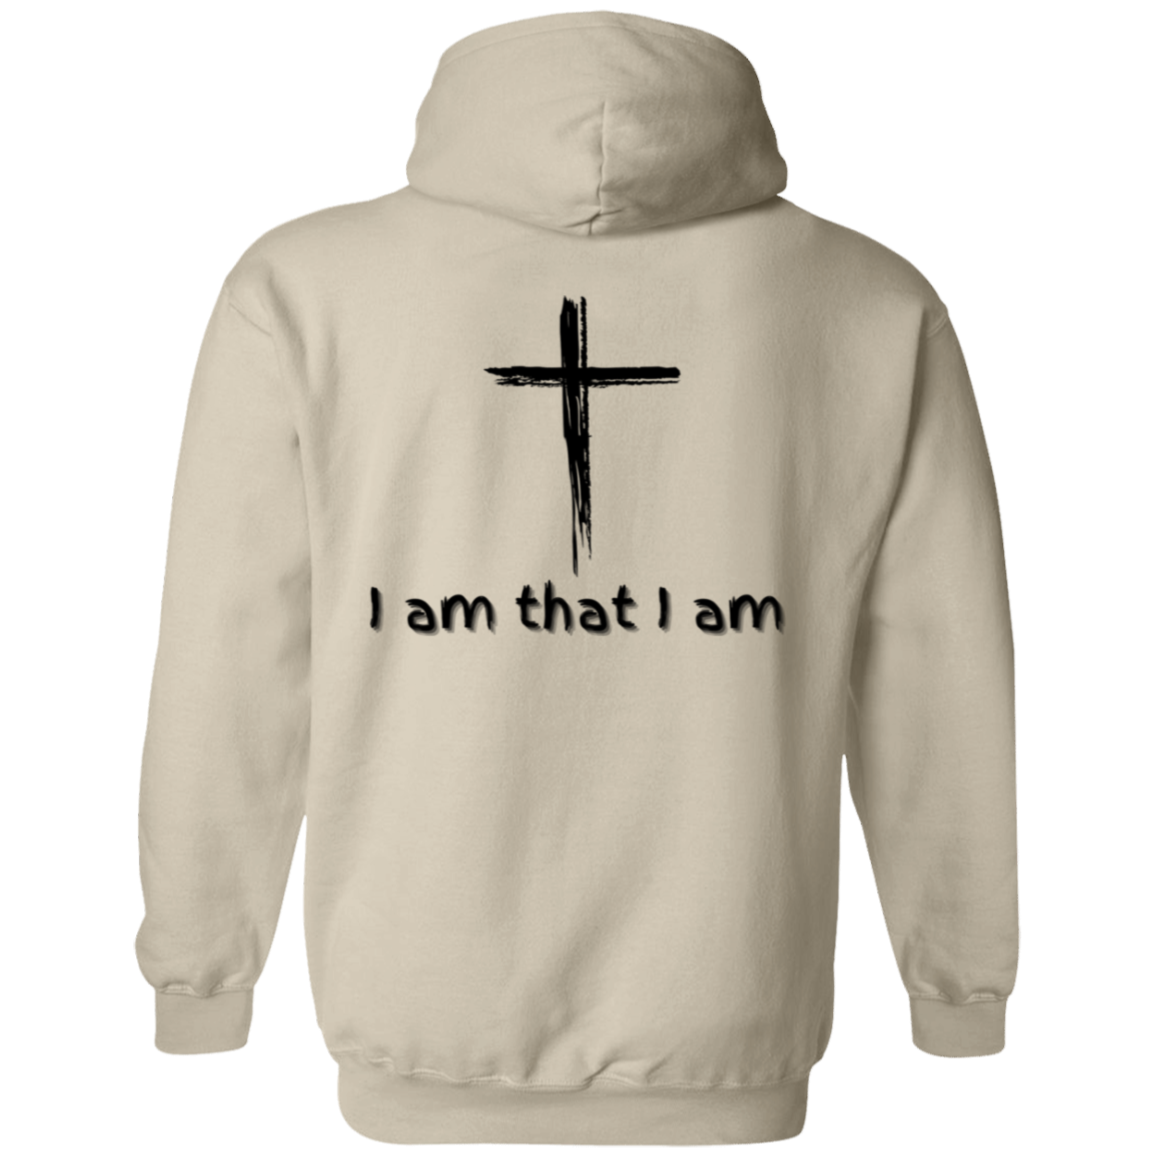 Jehovah Pullover Hoodie Front & Back - Black